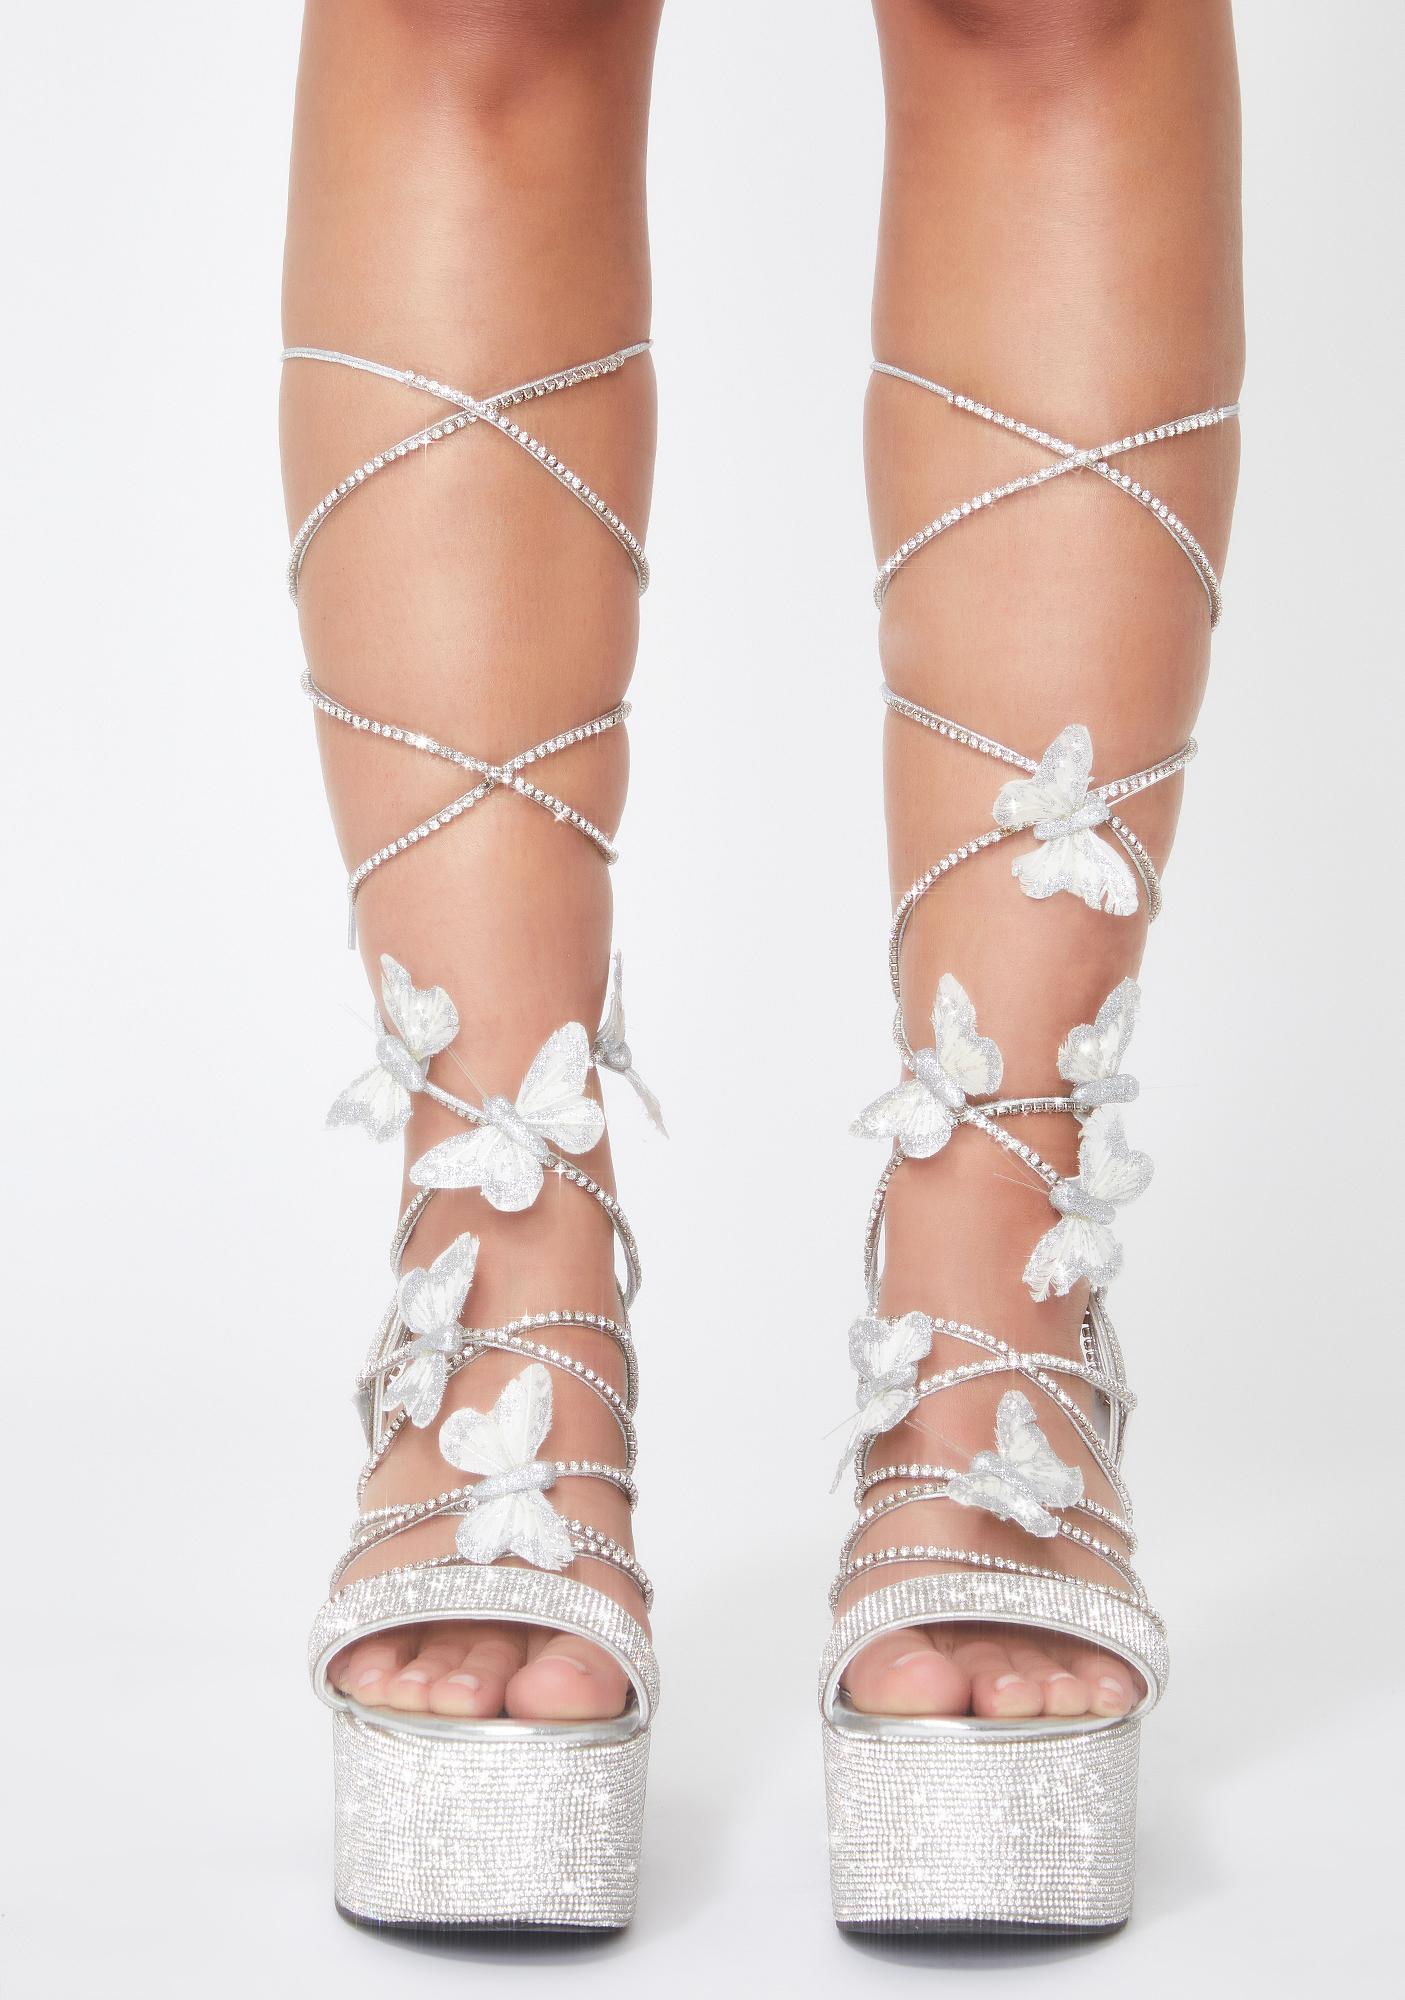 butterfly heels lace up